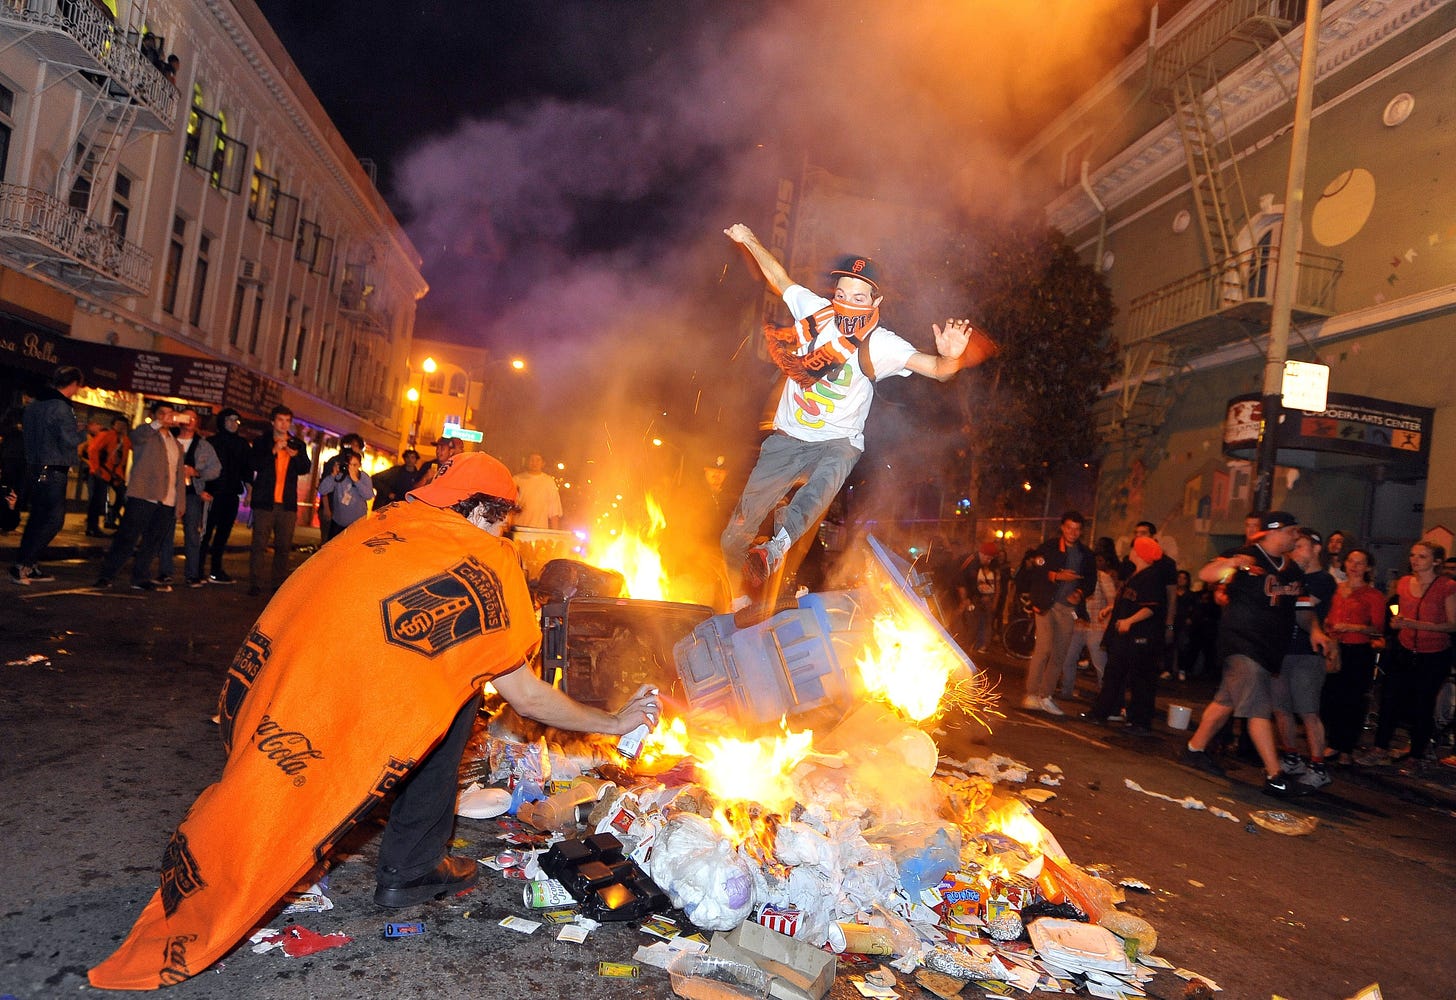 Image result from https://www.huffingtonpost.com/2014/10/30/san-francisco-giants-riots_n_6079240.html